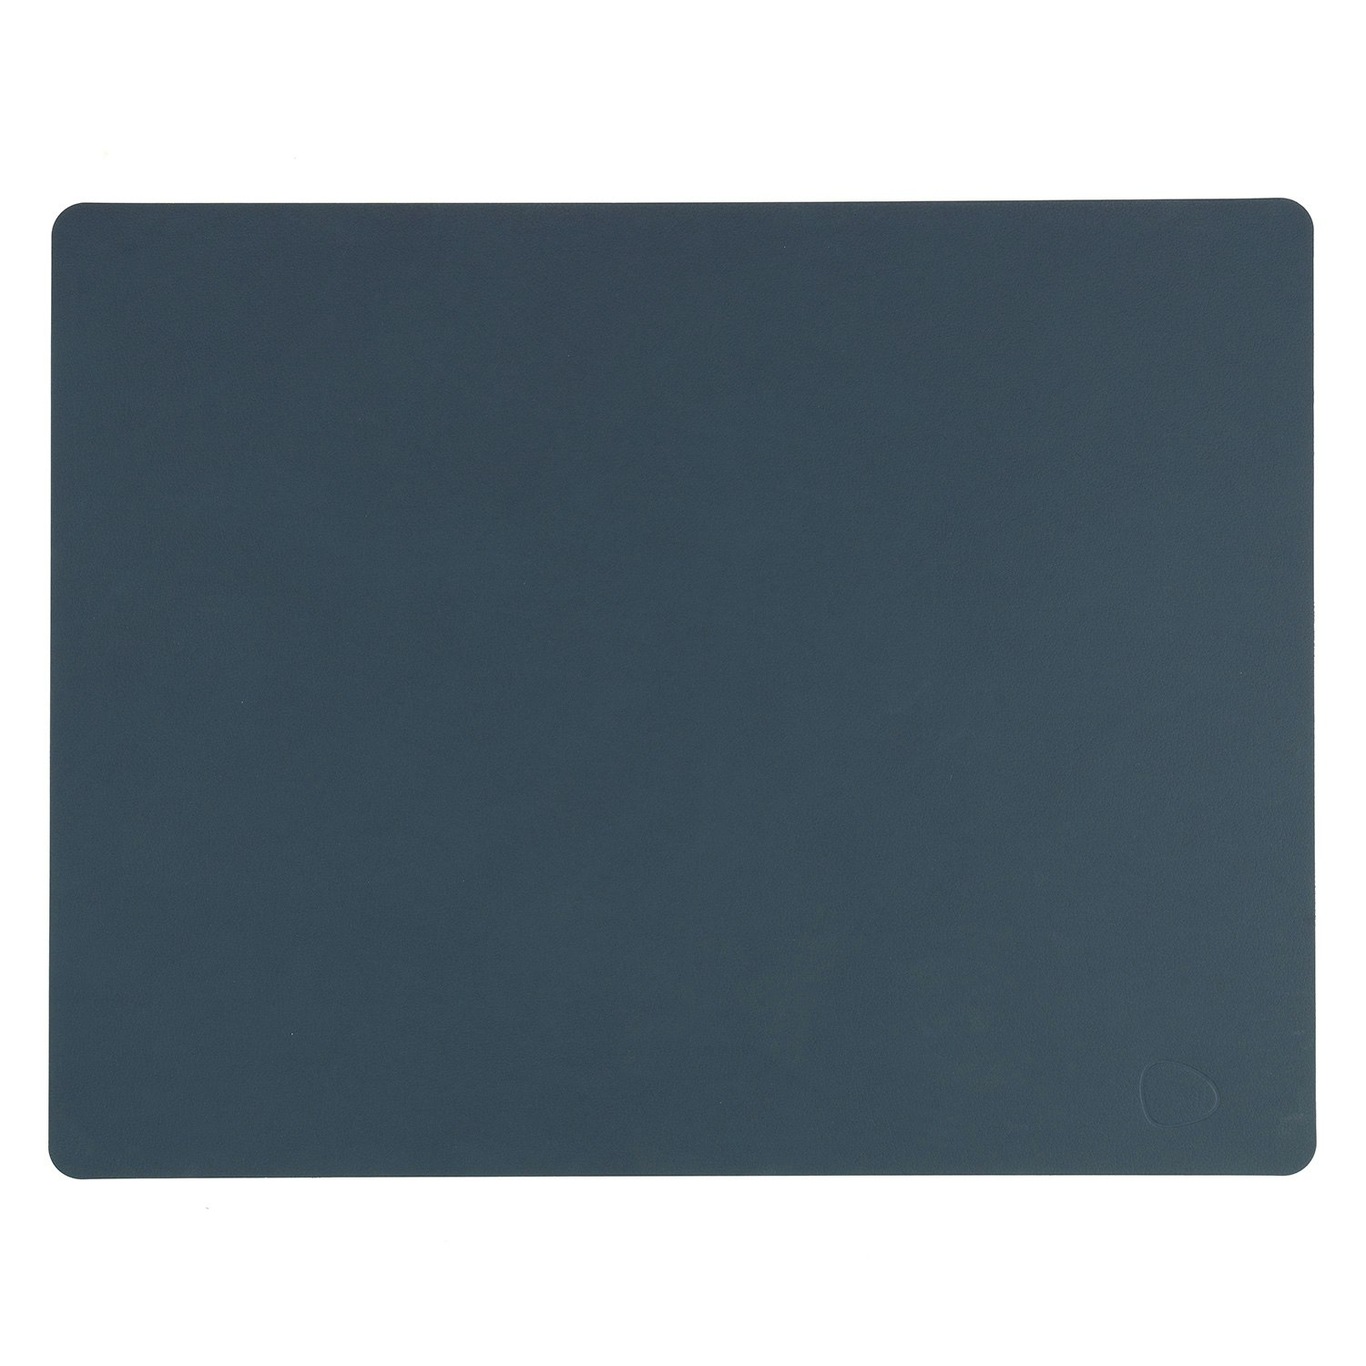 Square L Placemat Nupo 35x45 cm, Donkerblauw